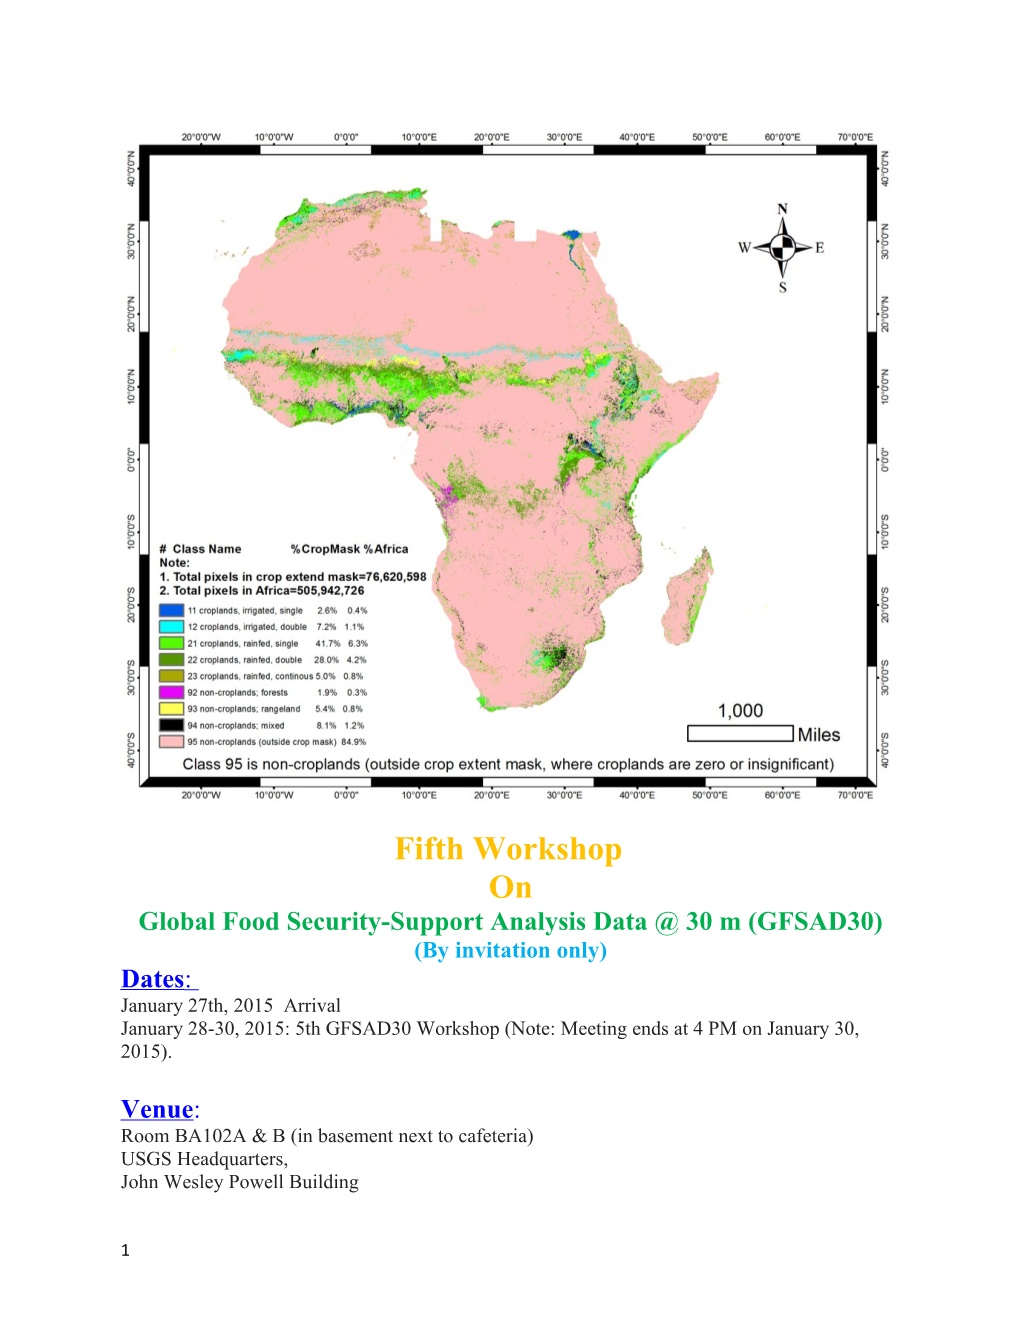 Global Food Security-Support Analysis Data 30 M (GFSAD30)